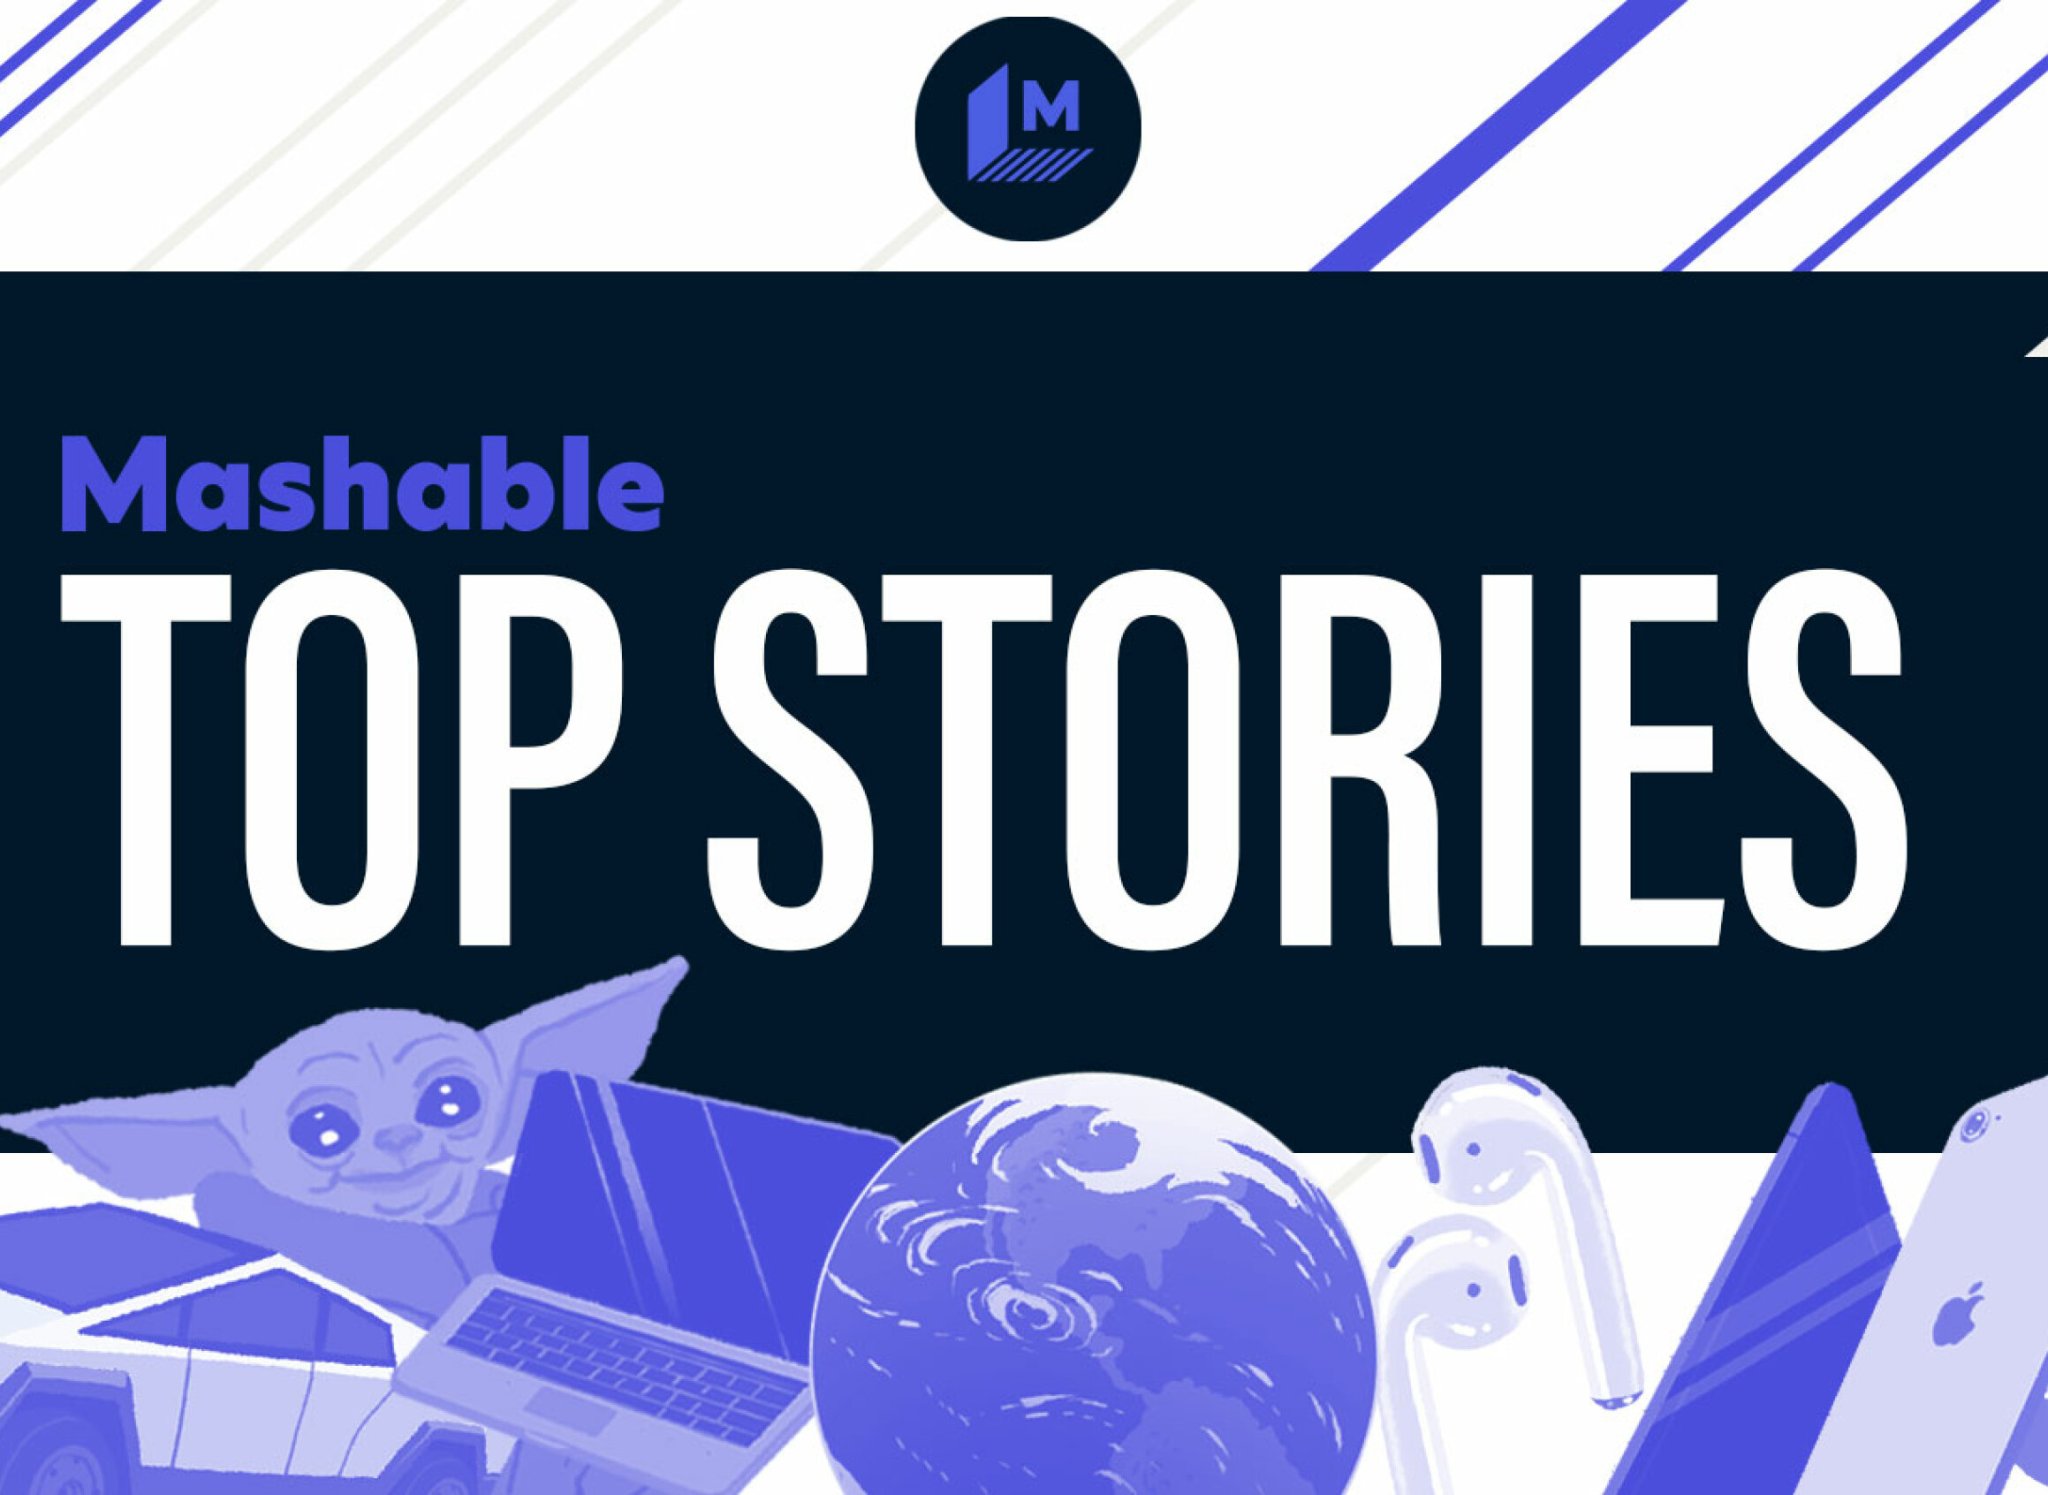 Sign up for Mashable Top Stories